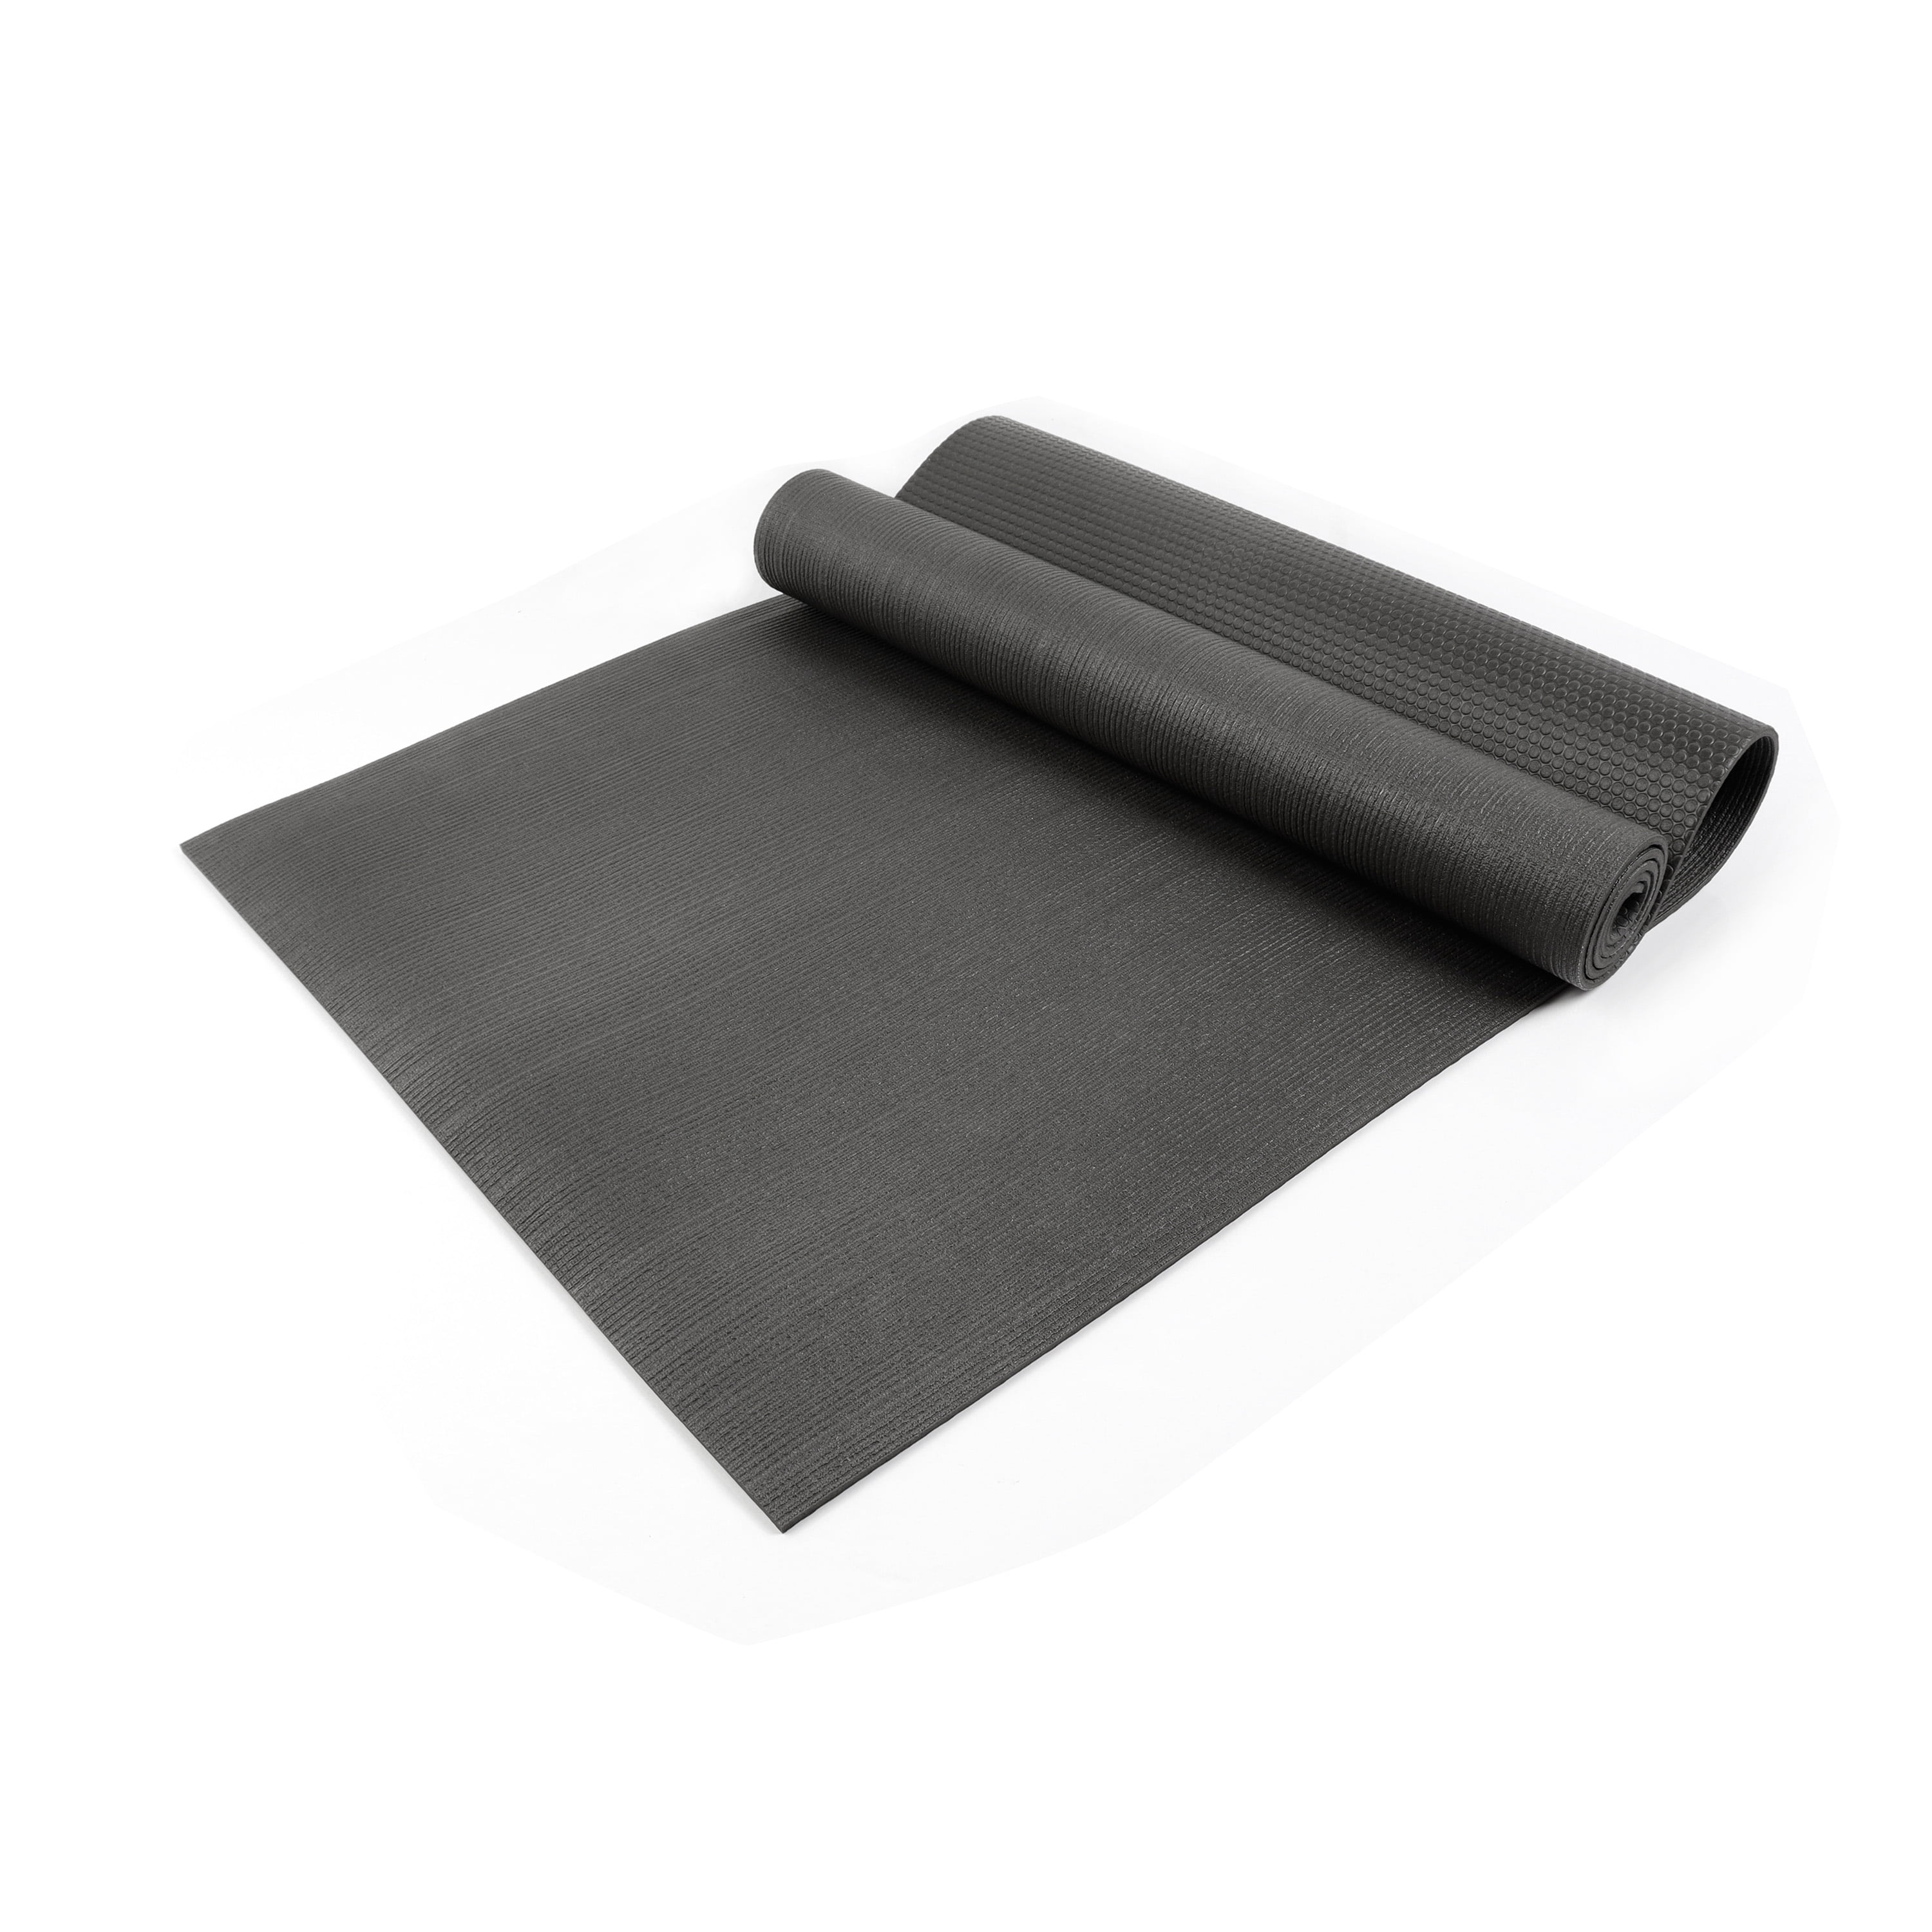 IIncStores ¾ Inch Thick Rubber Shock Absorbing Mat | Large Workout Mat for  a Stronger and Safer Pro-Level Home Gym, Commercial Weight Room, or Horse